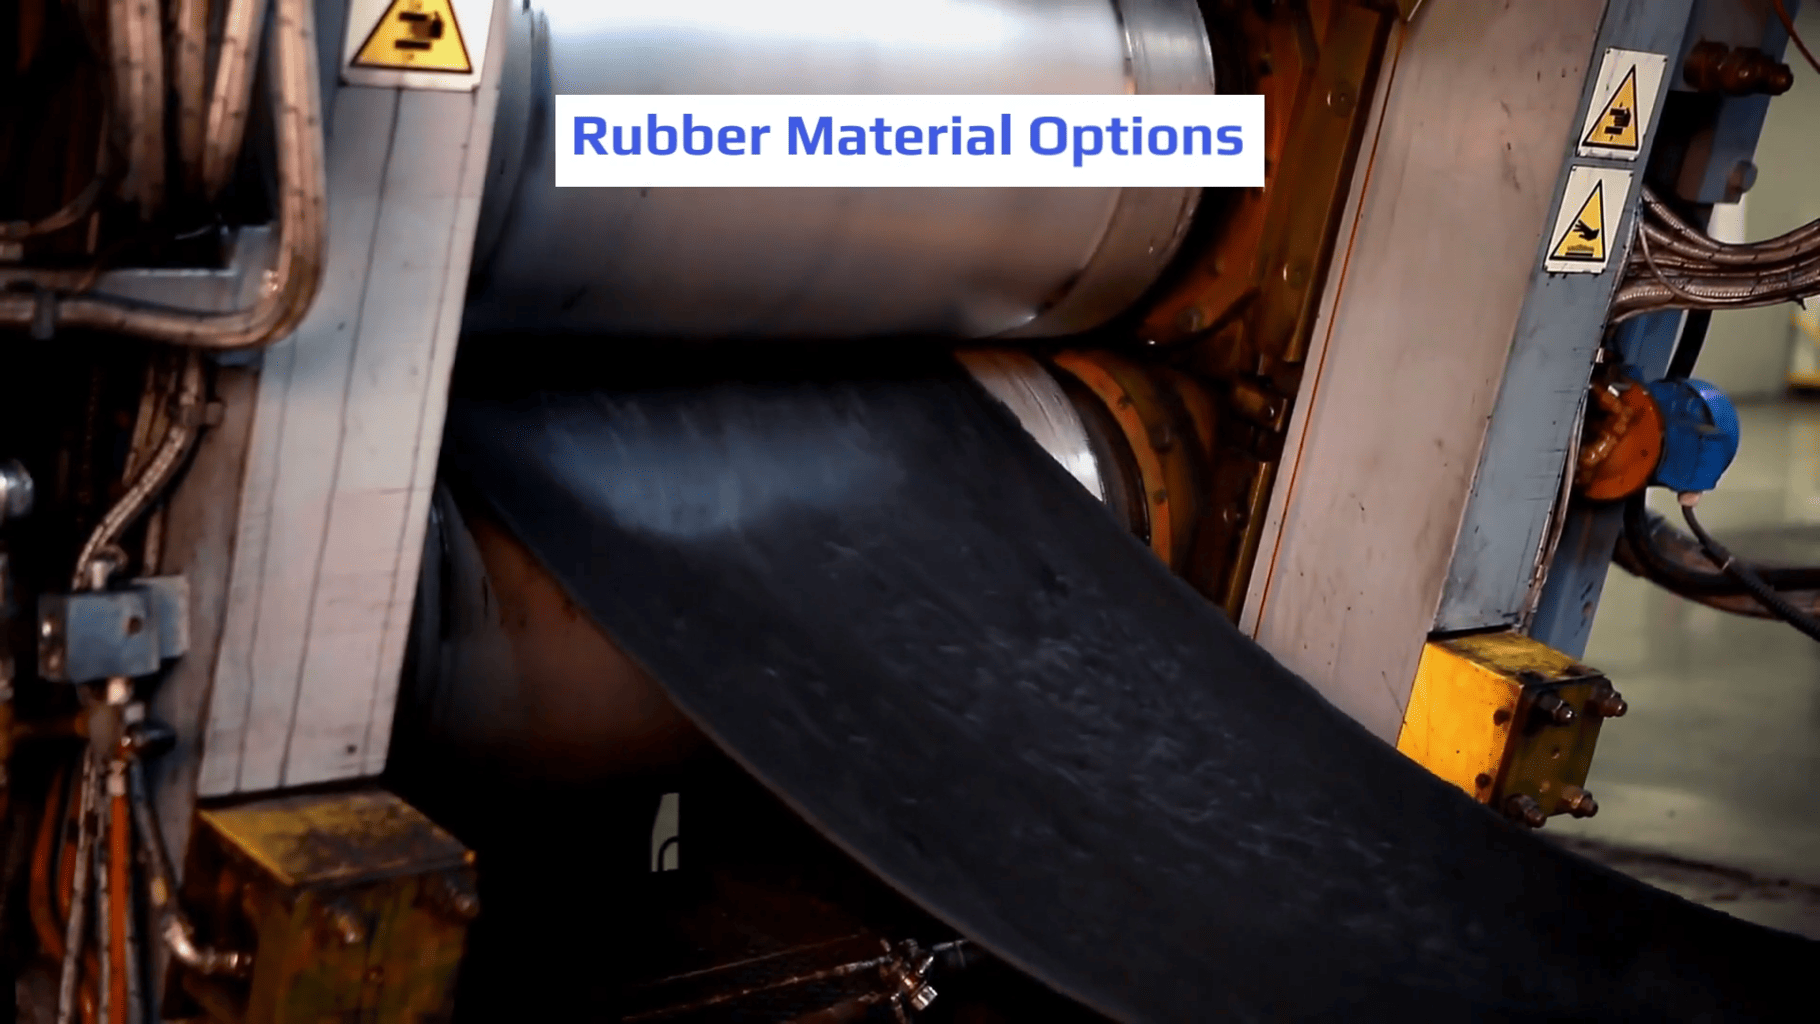 Rubber Material Options